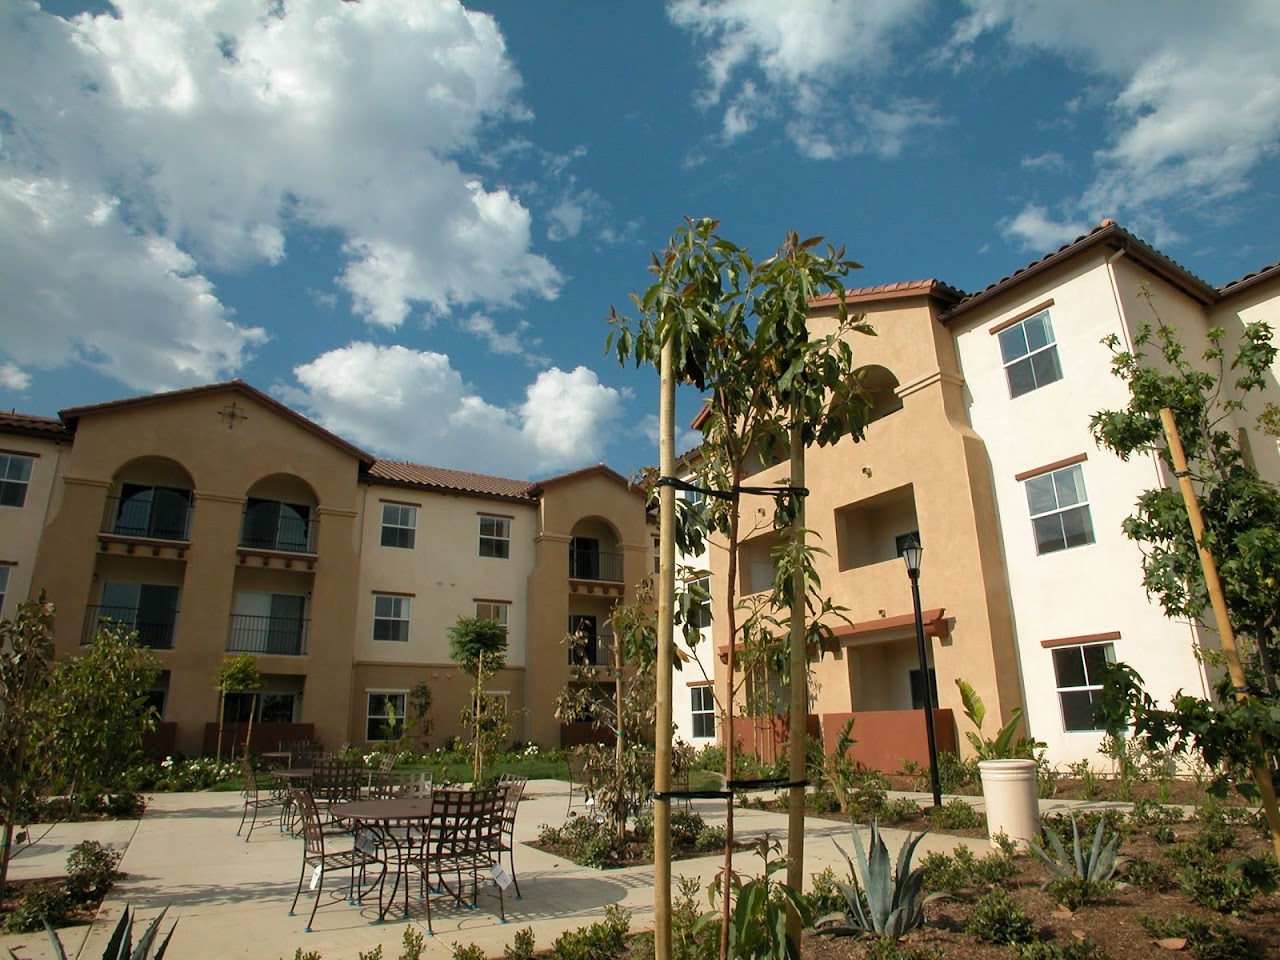 Photo of THE GARDENS AT SIERRA at 16838 CERES AVE FONTANA, CA 92335